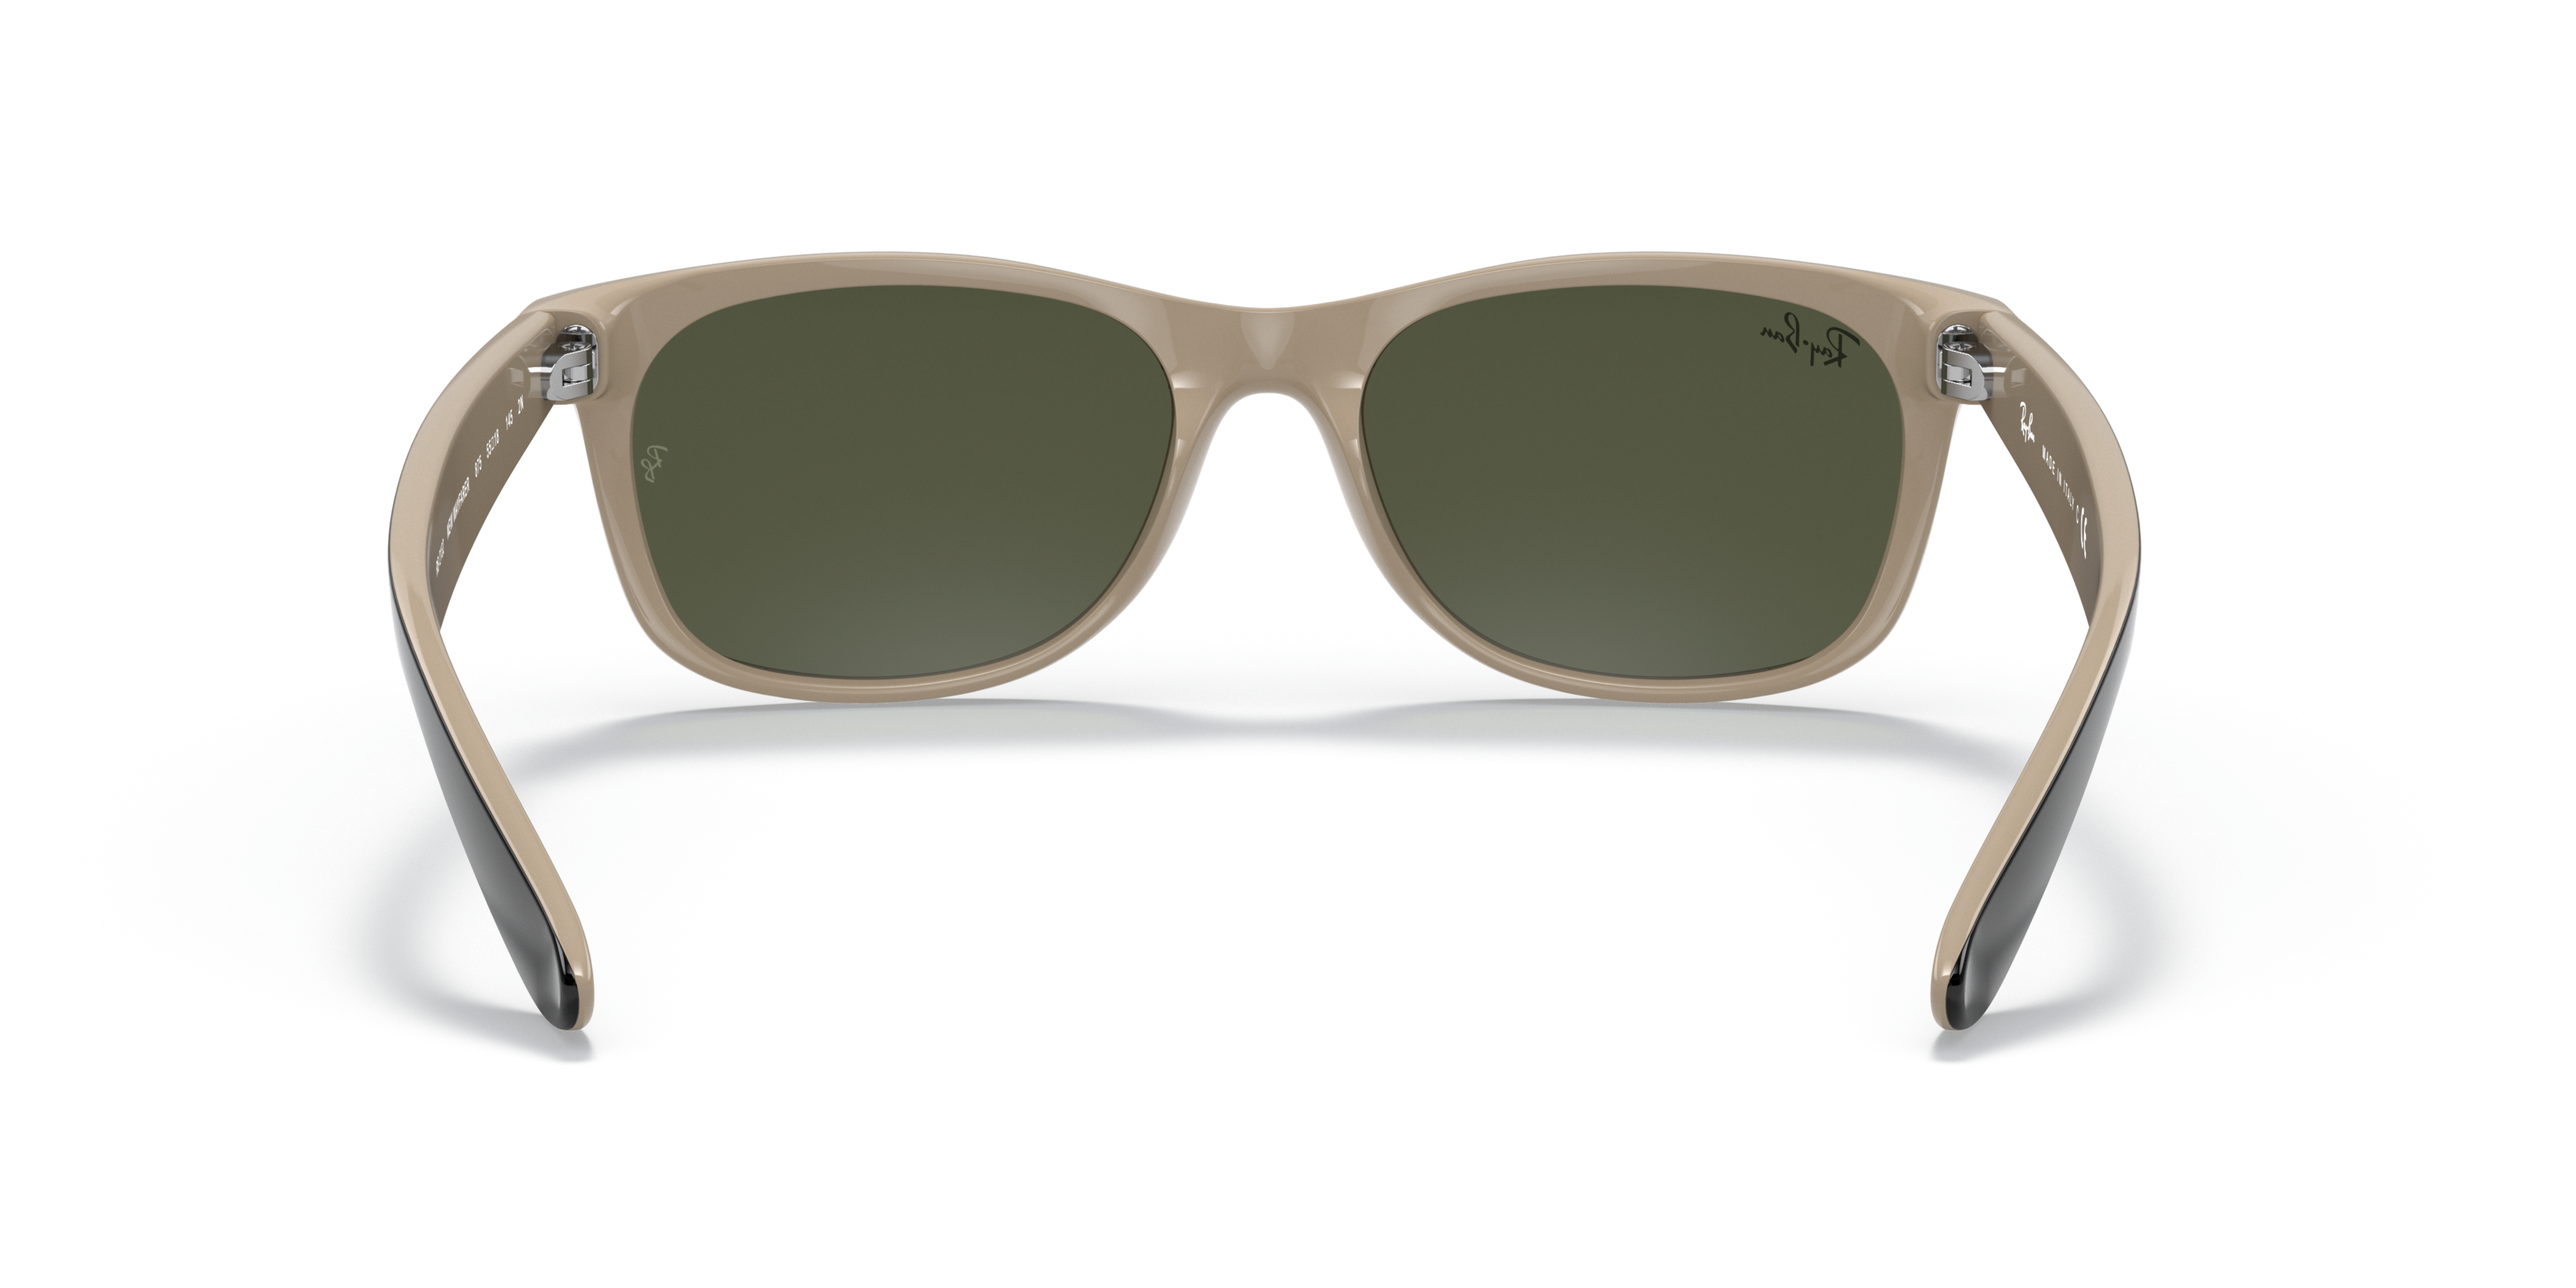 [products.image.detail02] Ray-Ban New Wayfarer RB2132 875